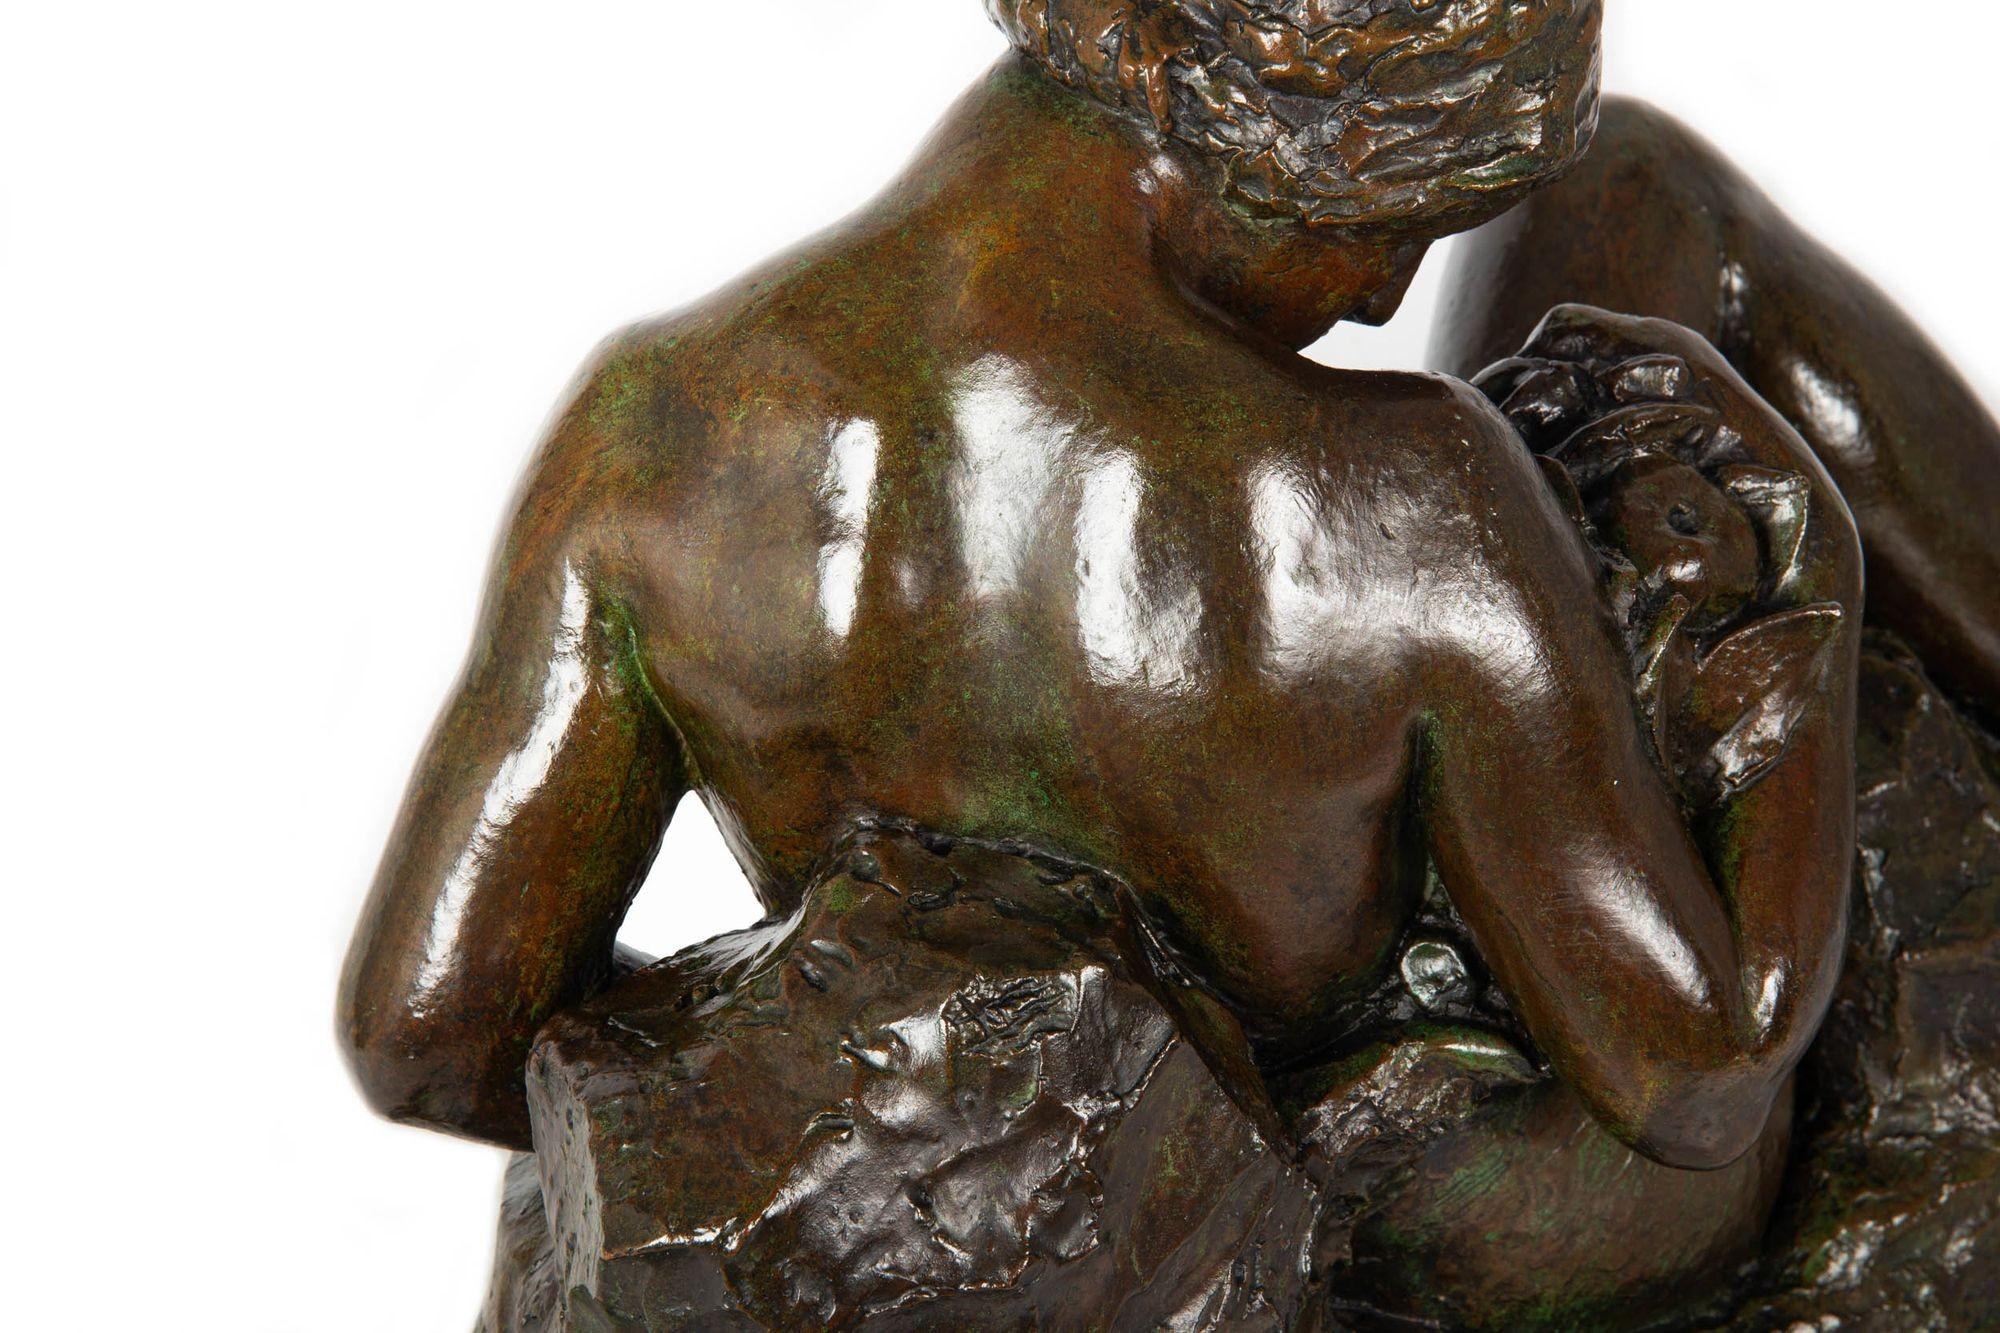 Rare French Modernist Bronze Sculpture of “Eve” (1937) by Aime Octobre For Sale 5